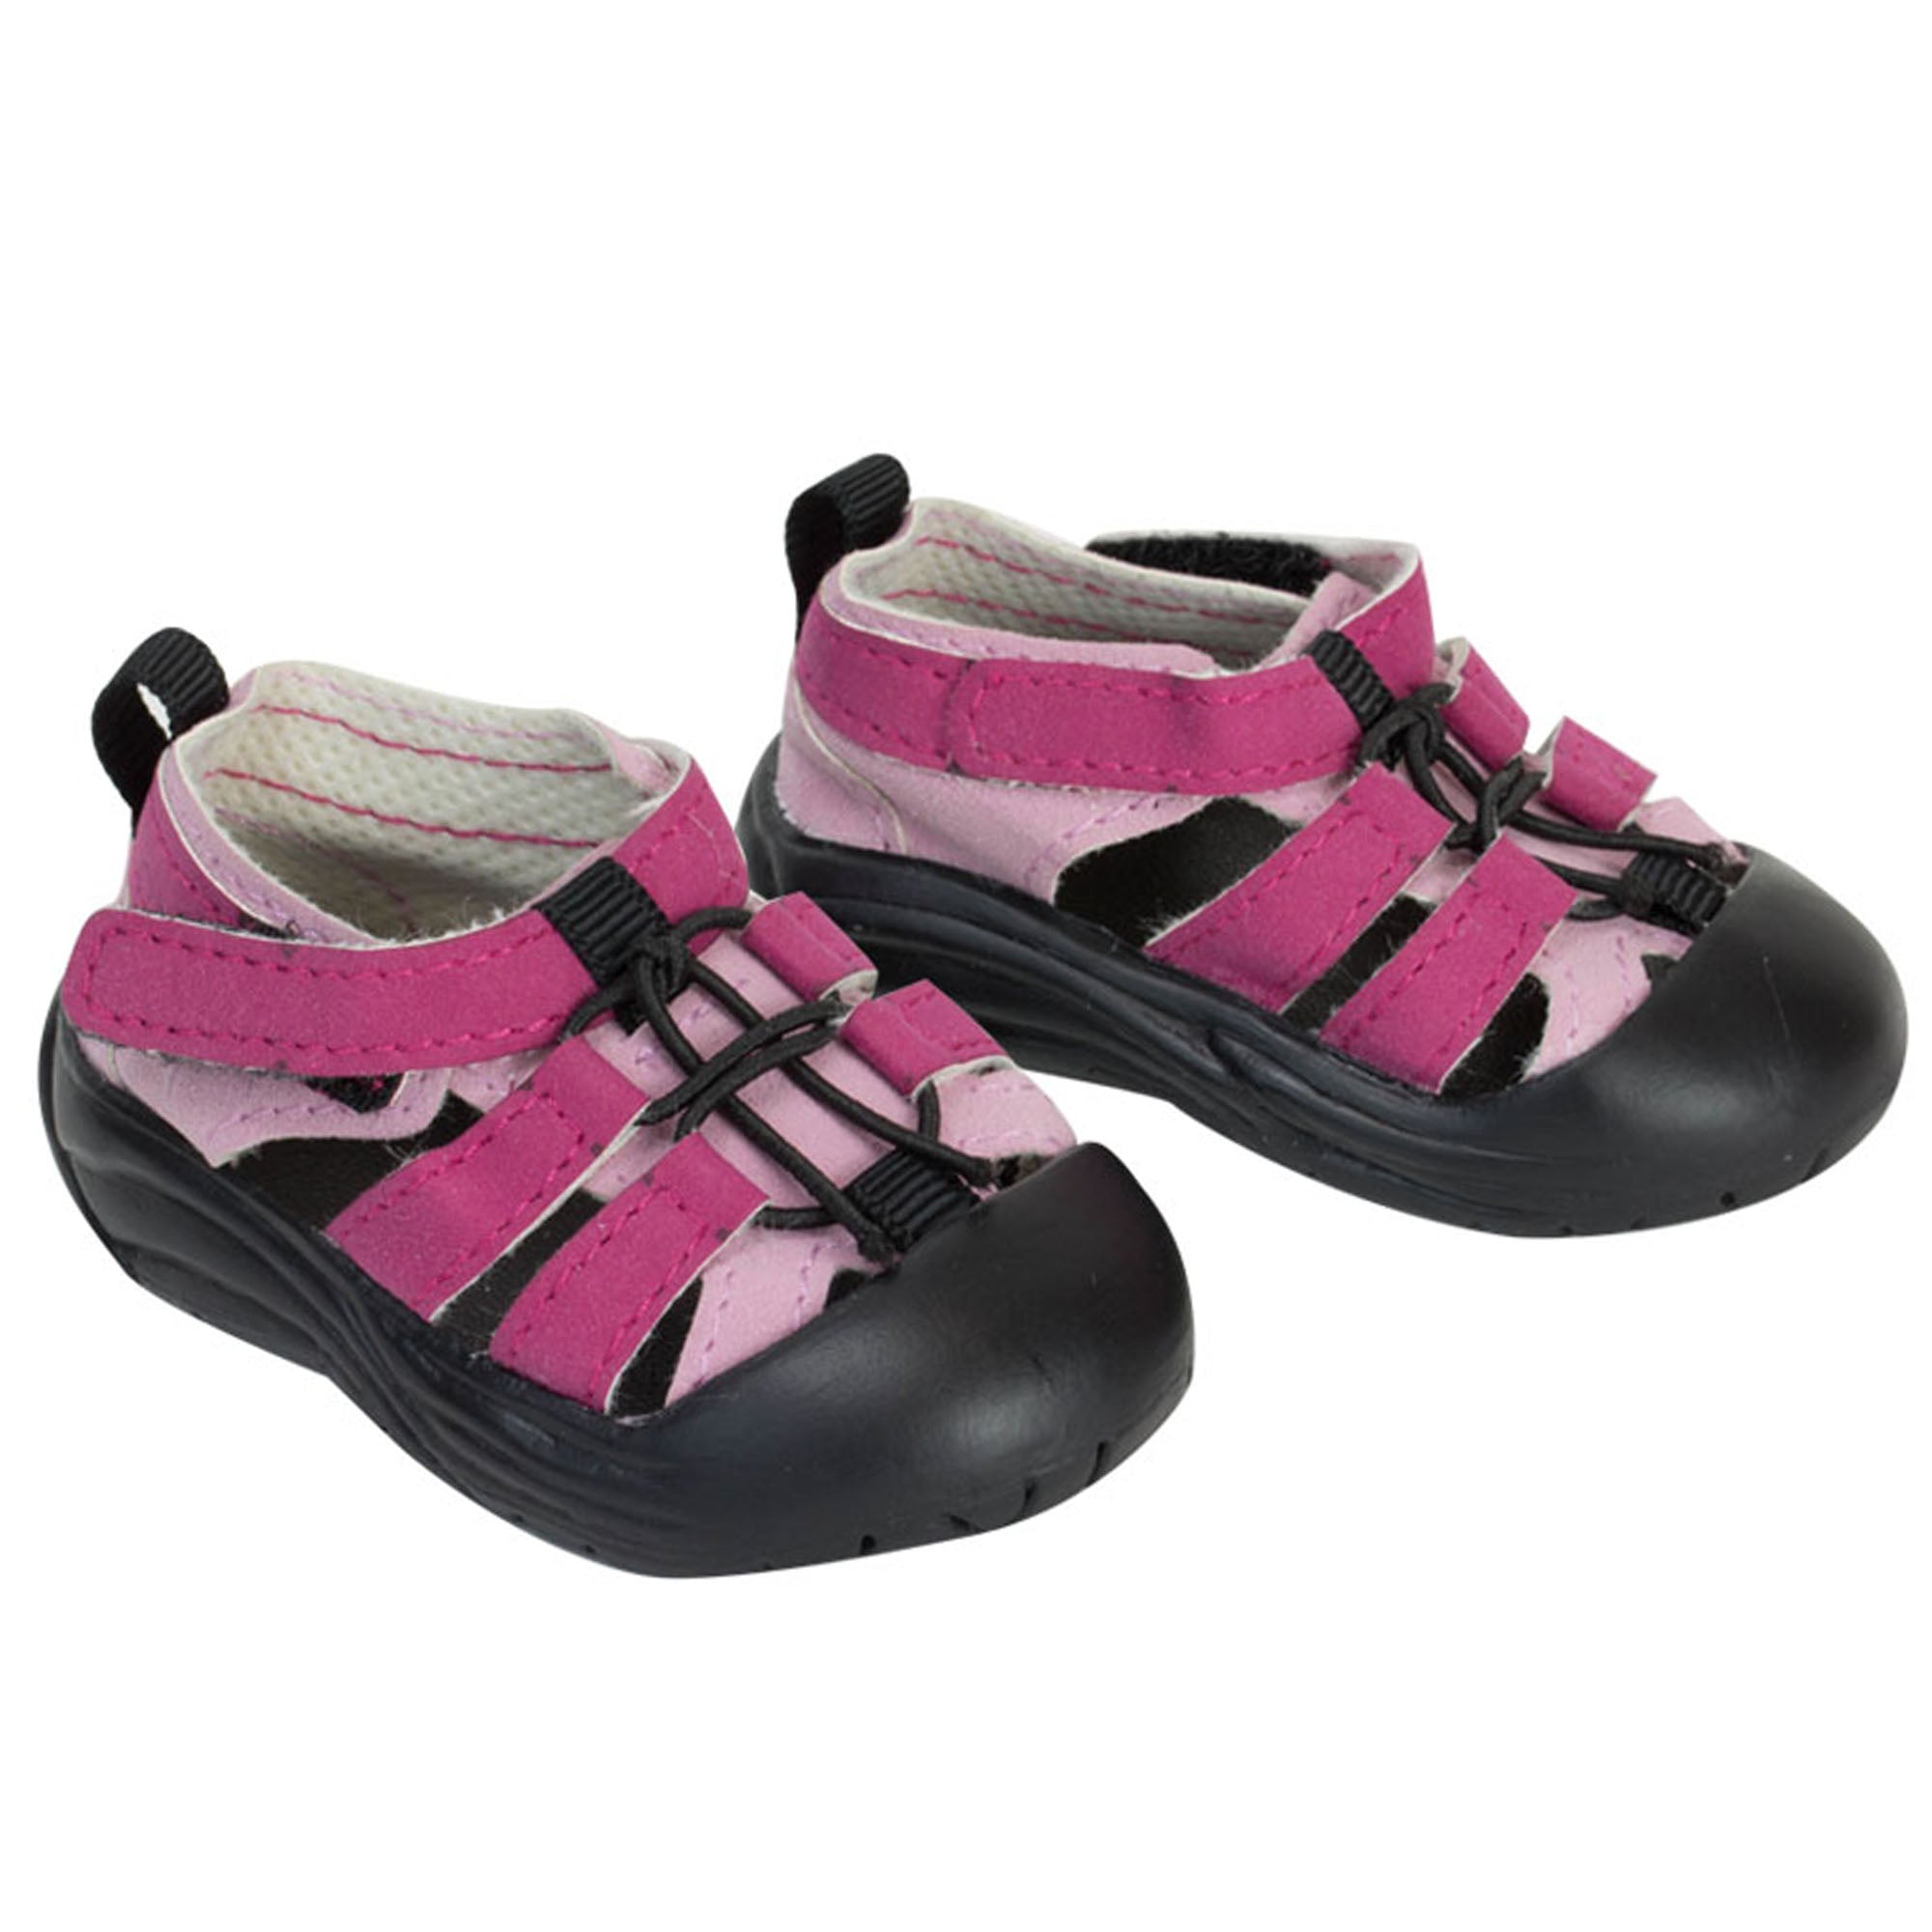 Sophia’s Outdoor Athletic Hiking Gender-Neutral Mix & Match Velcro Sandal Shoes for 18” Dolls, Pink/Black